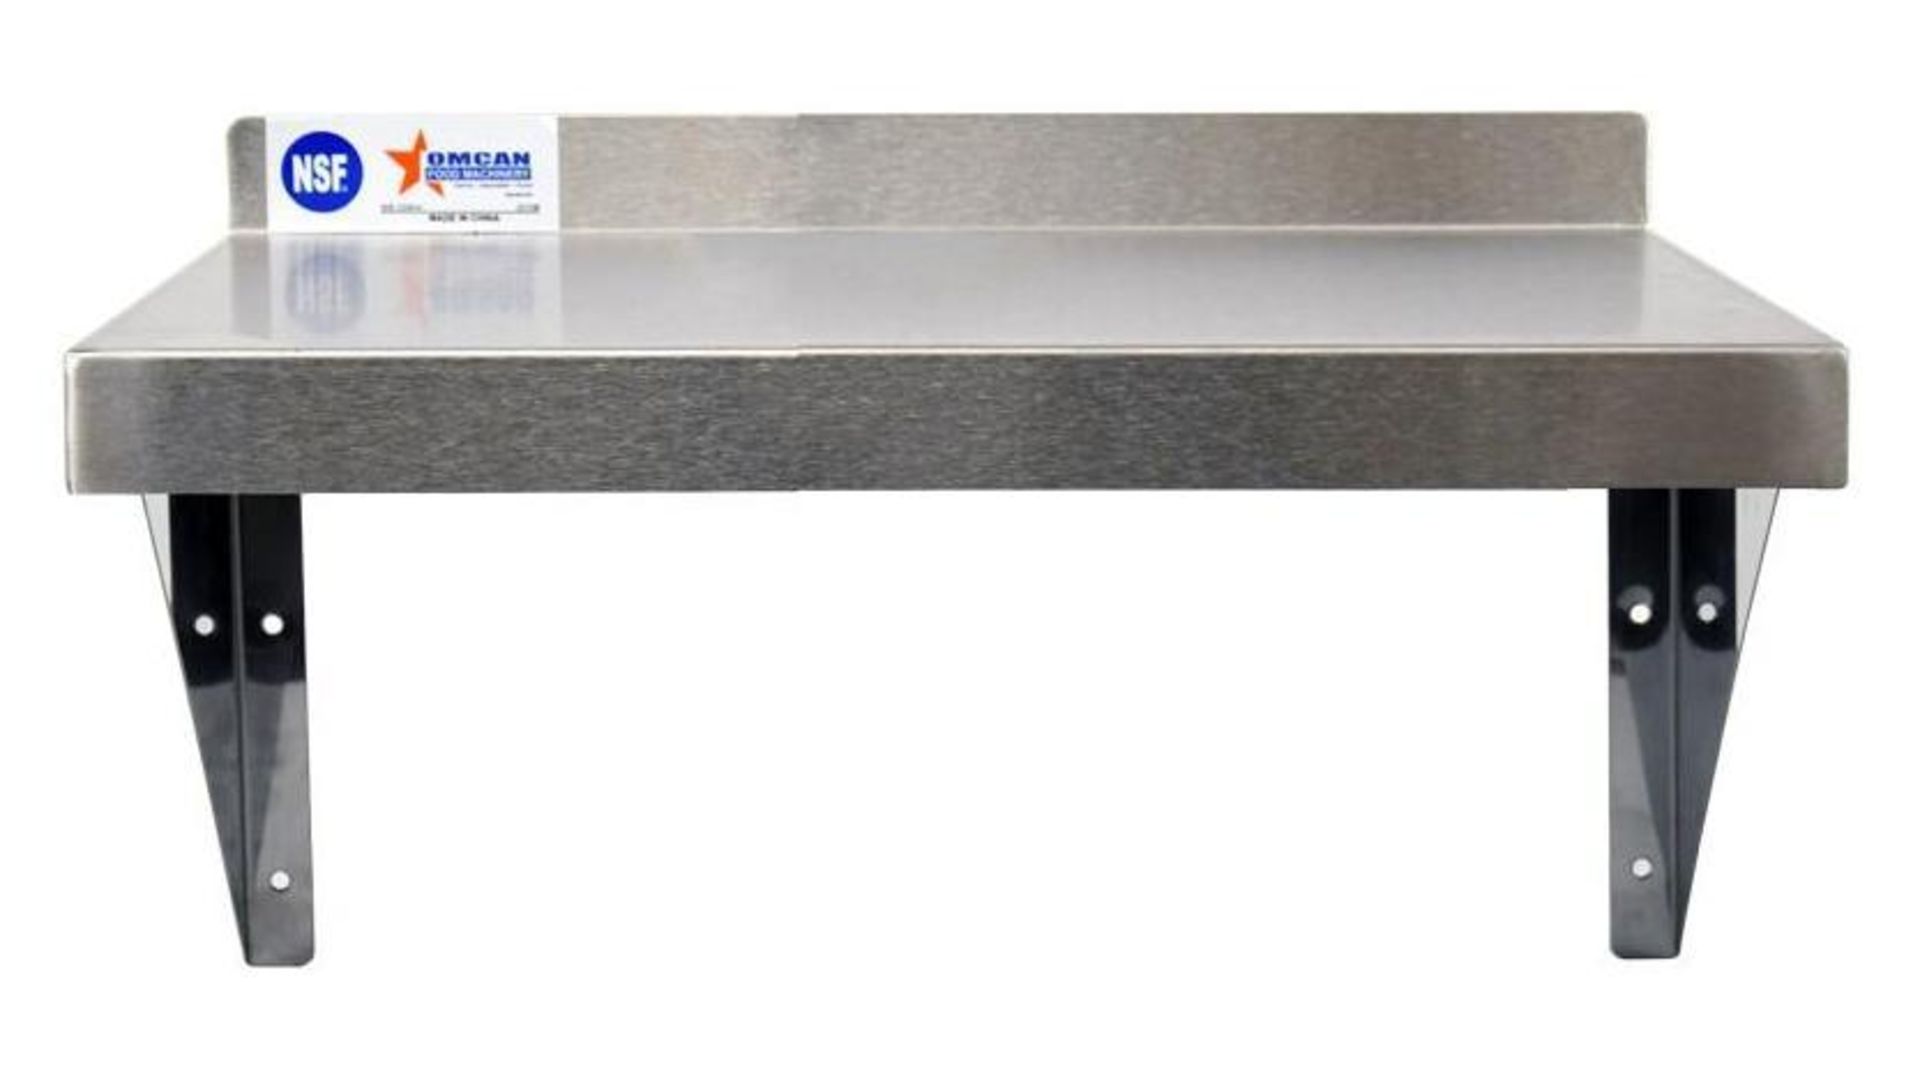 36" X 16" STAINLESS STEEL WALL SHELF - OMCAN 24409 - NEW - Image 5 of 13